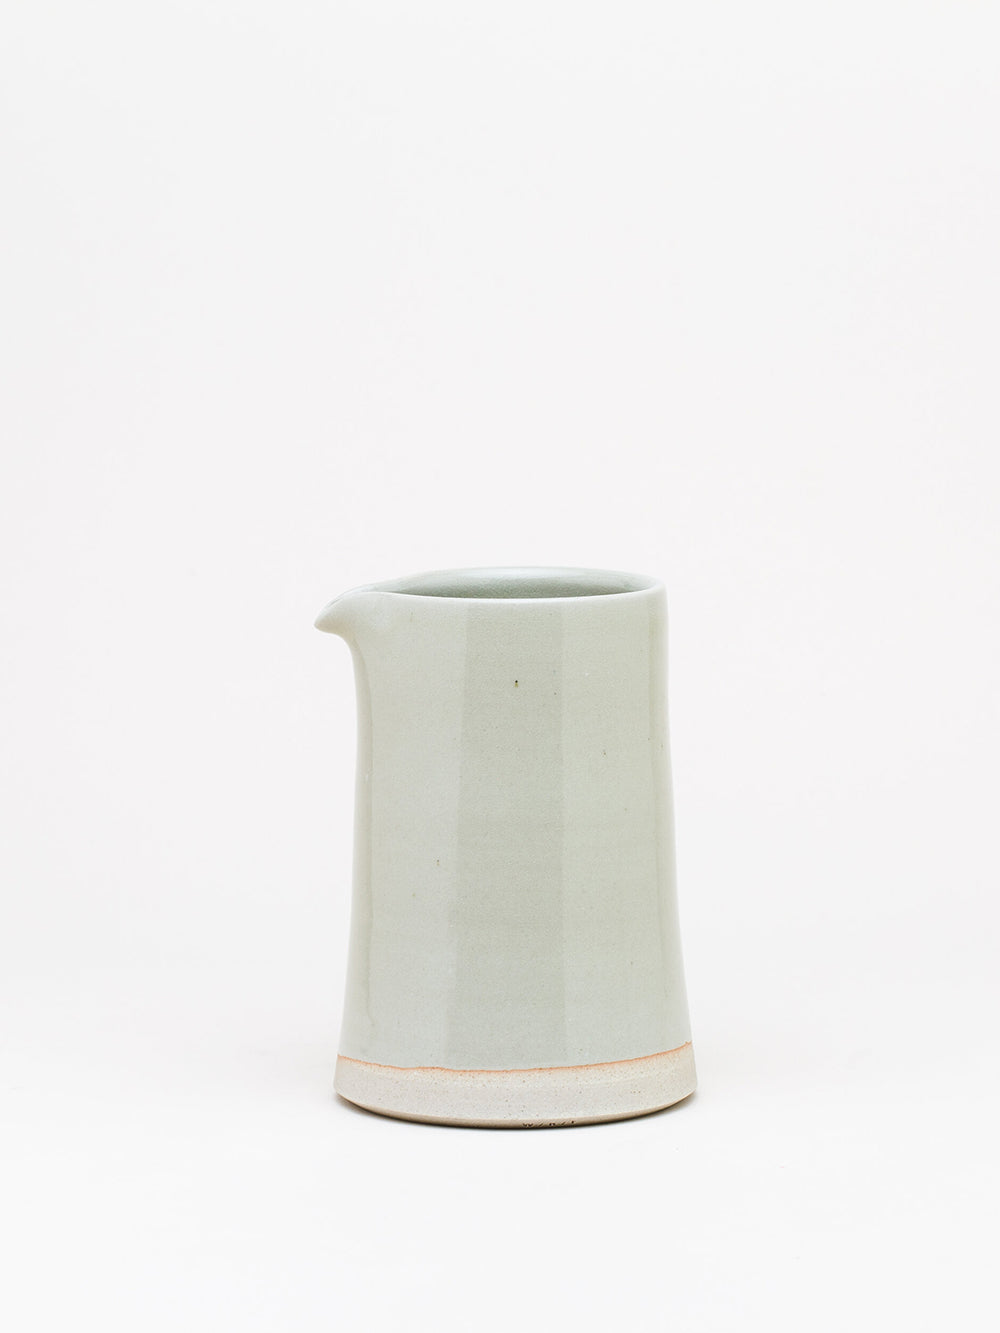 WRF Small Pitcher in Mist